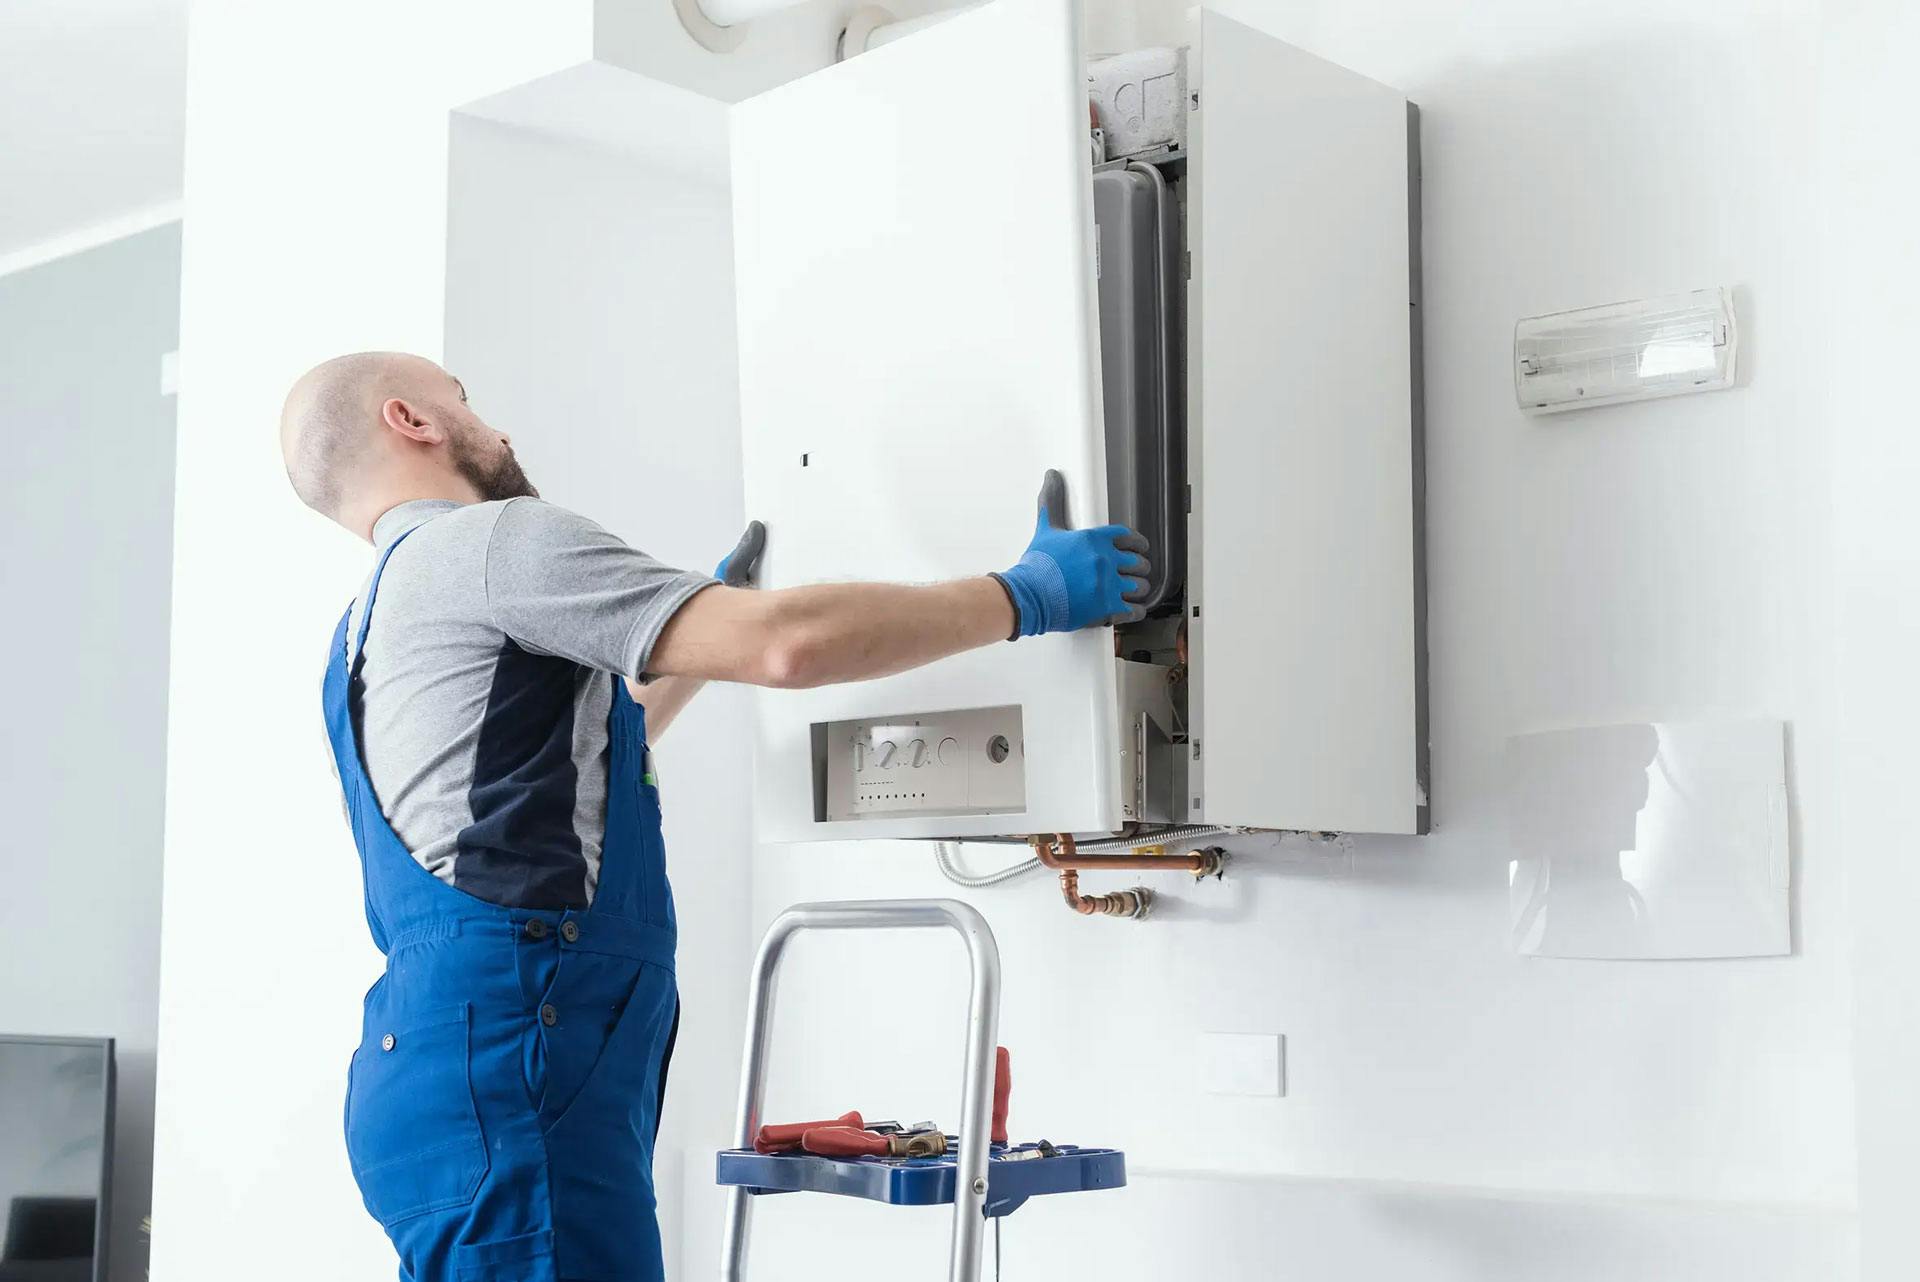 An engineer installing a wall-mounted boiler